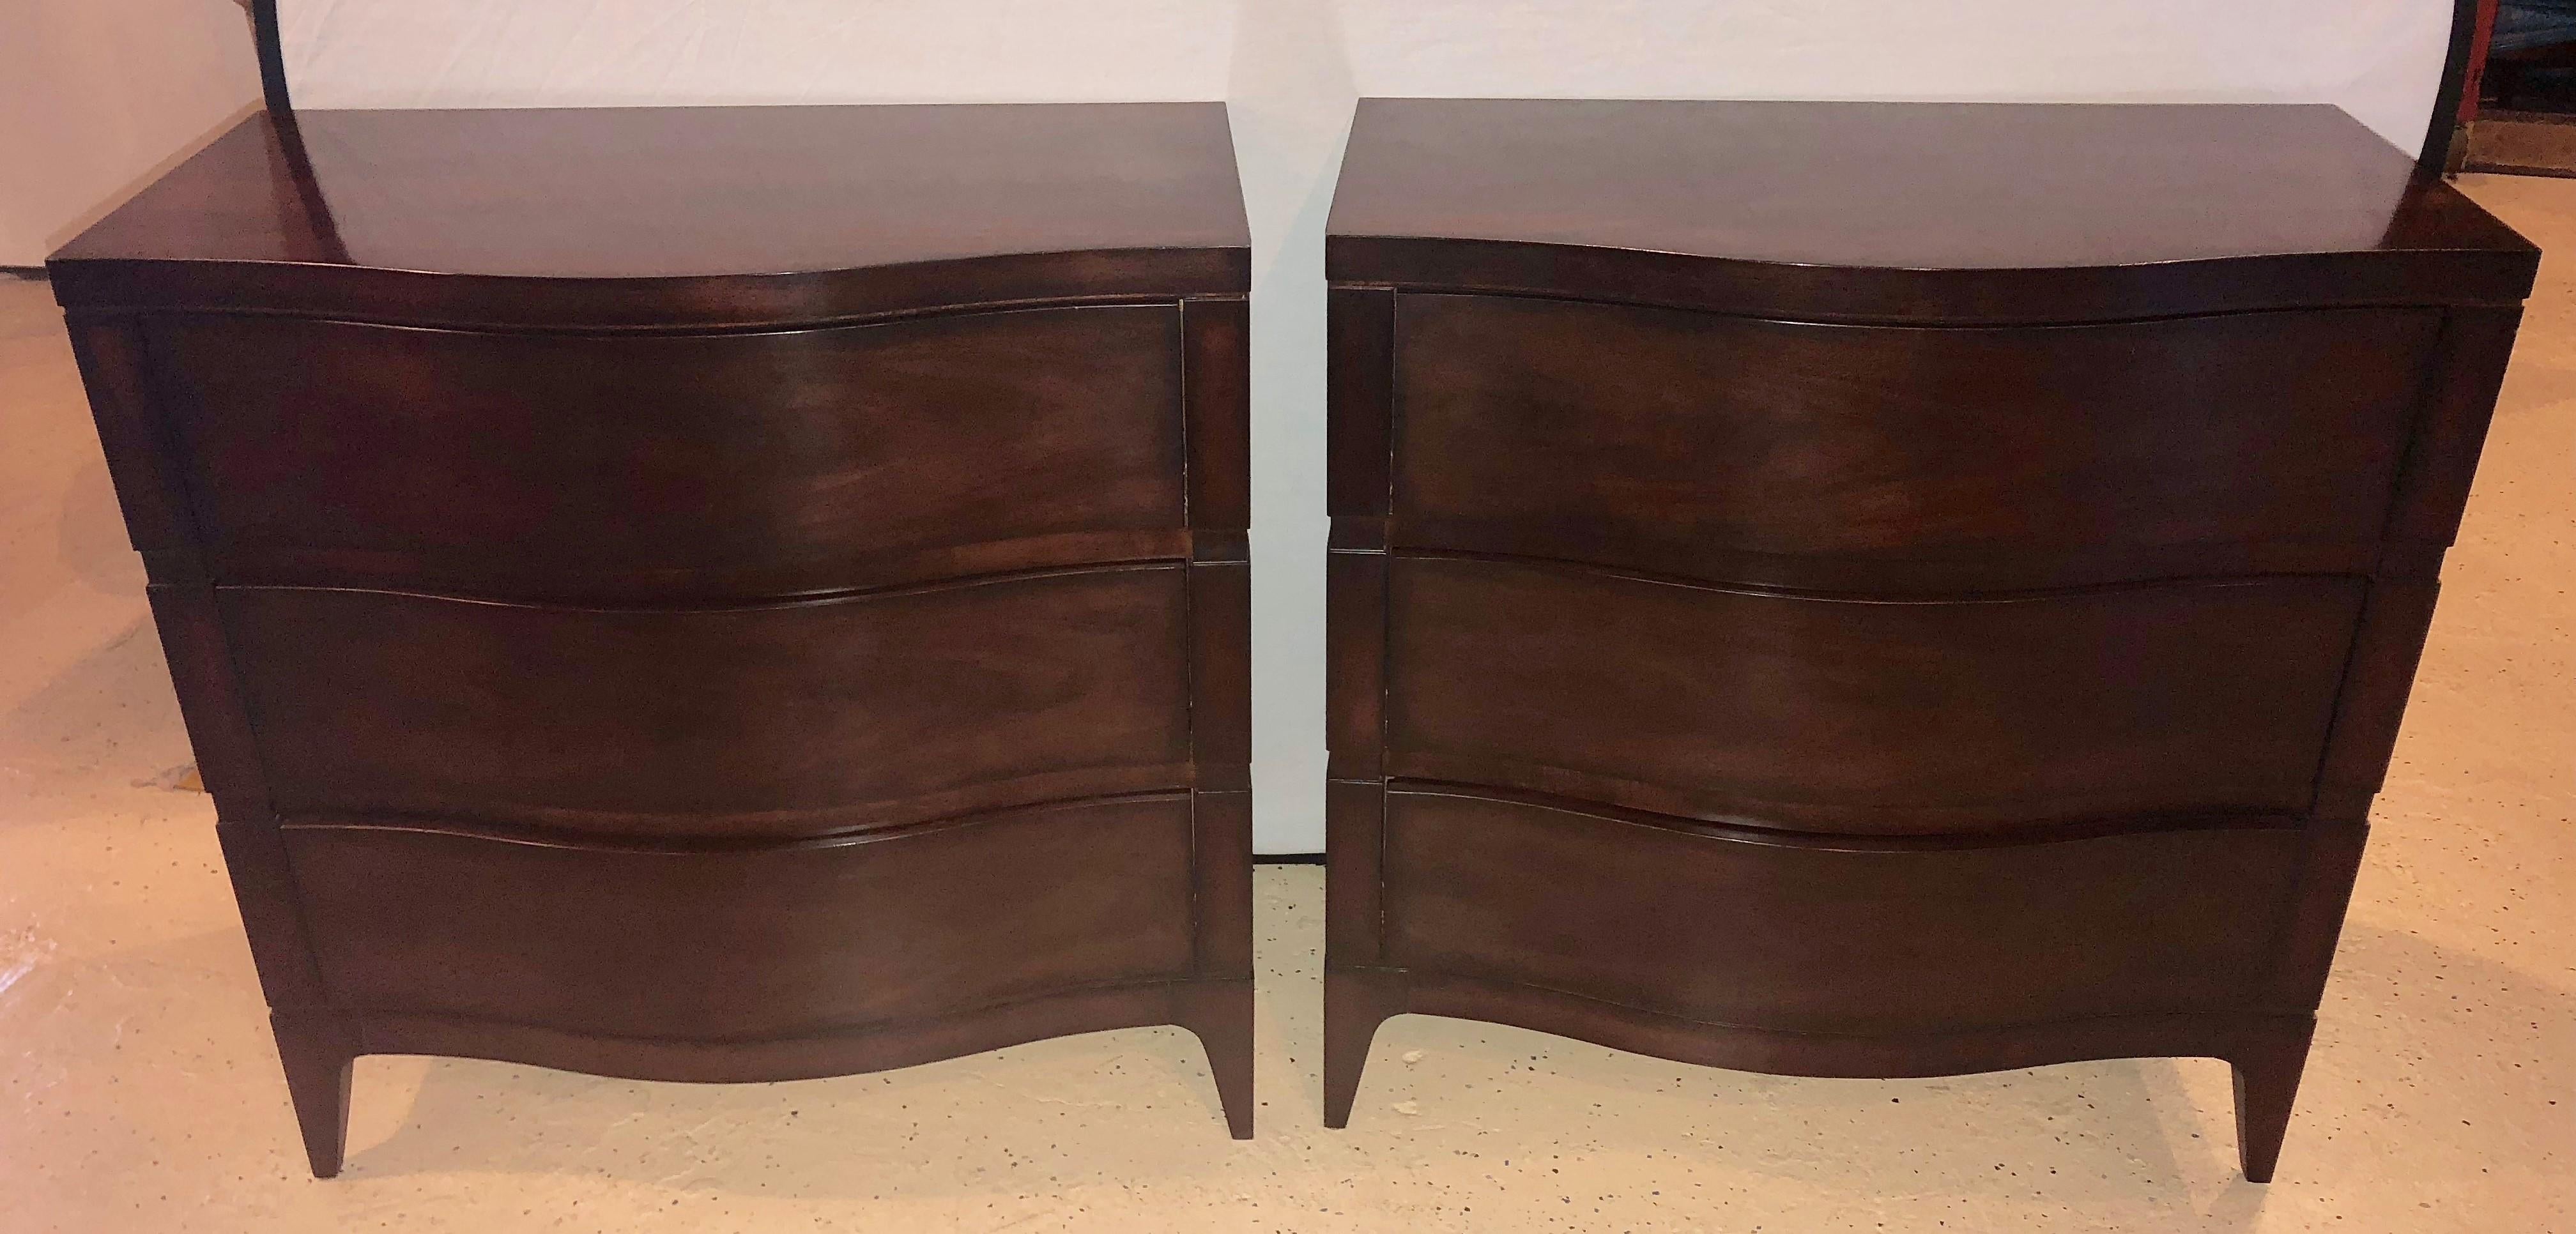 Pair of serpentine front Mahogany chest or nightstand commodes by the Hickory white furniture company. Each having three curved front drawers on spade feet with brick corners with box cut-out sides. Fine condition.